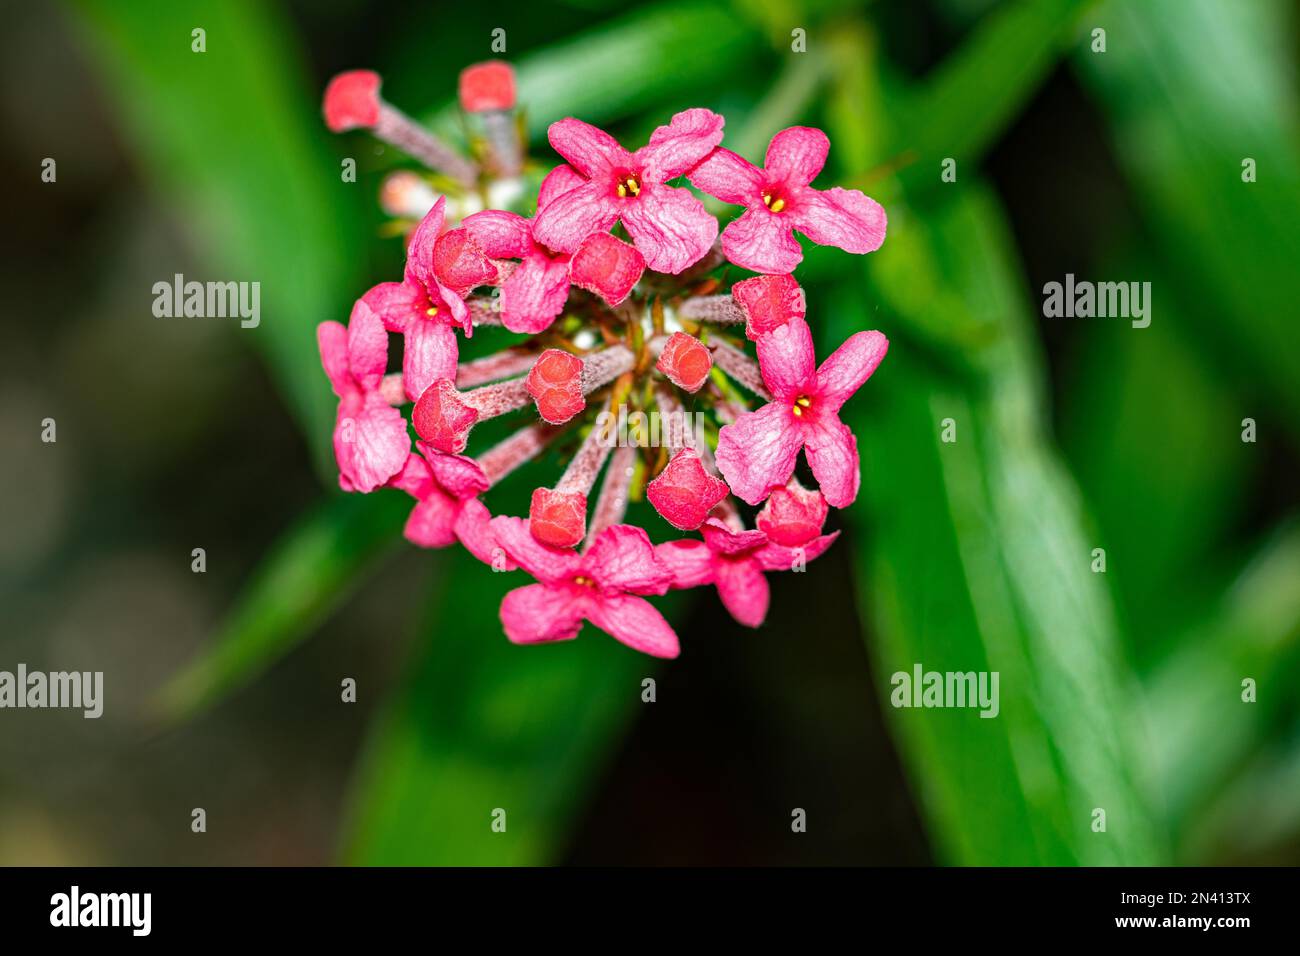 A close-up shot of Rose Daphne flowers in sunlight with green blurry background Stock Photo